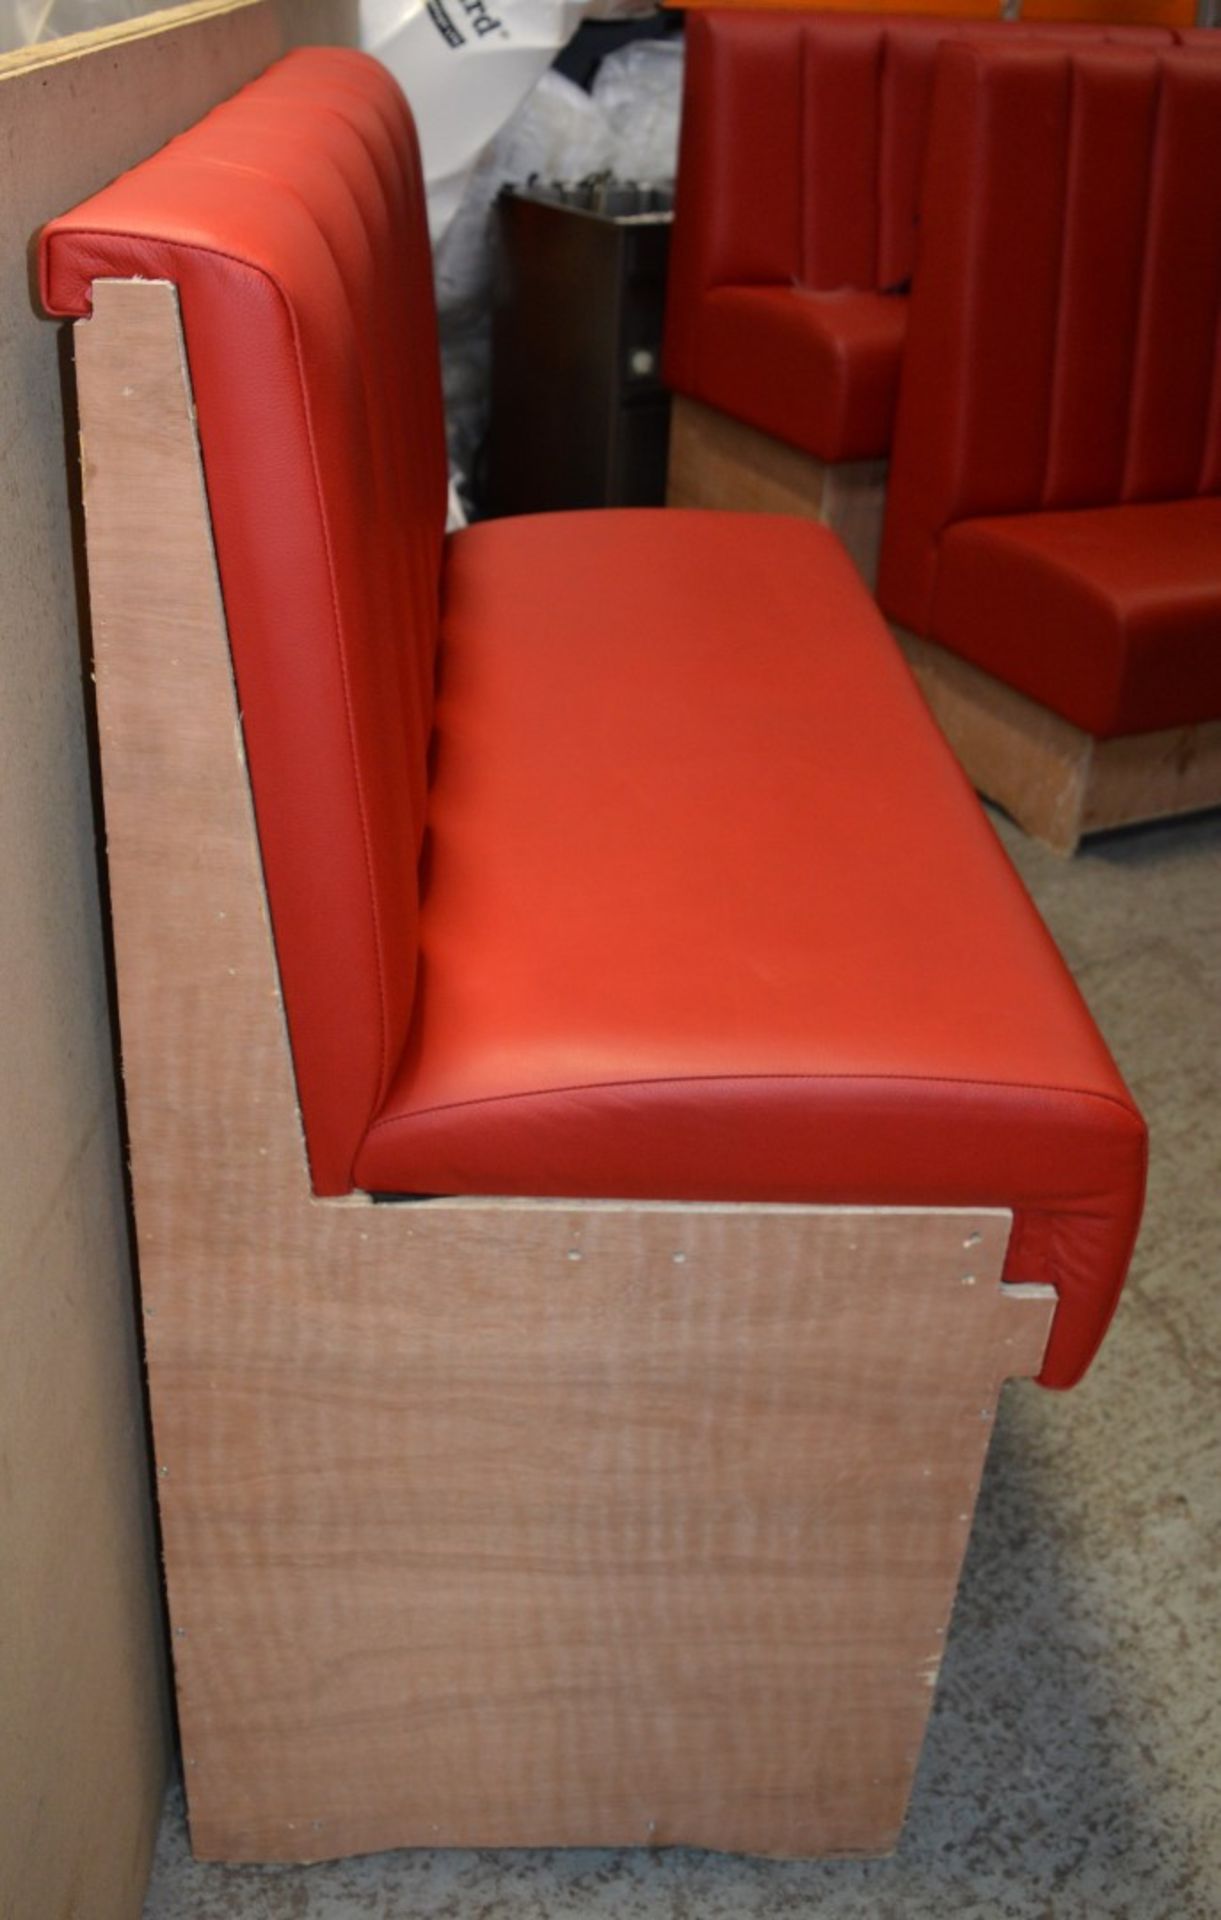 1 x High Seat Single Seating Bench Upholstered in Red Leather - Sits upto Two People - High - Image 12 of 16